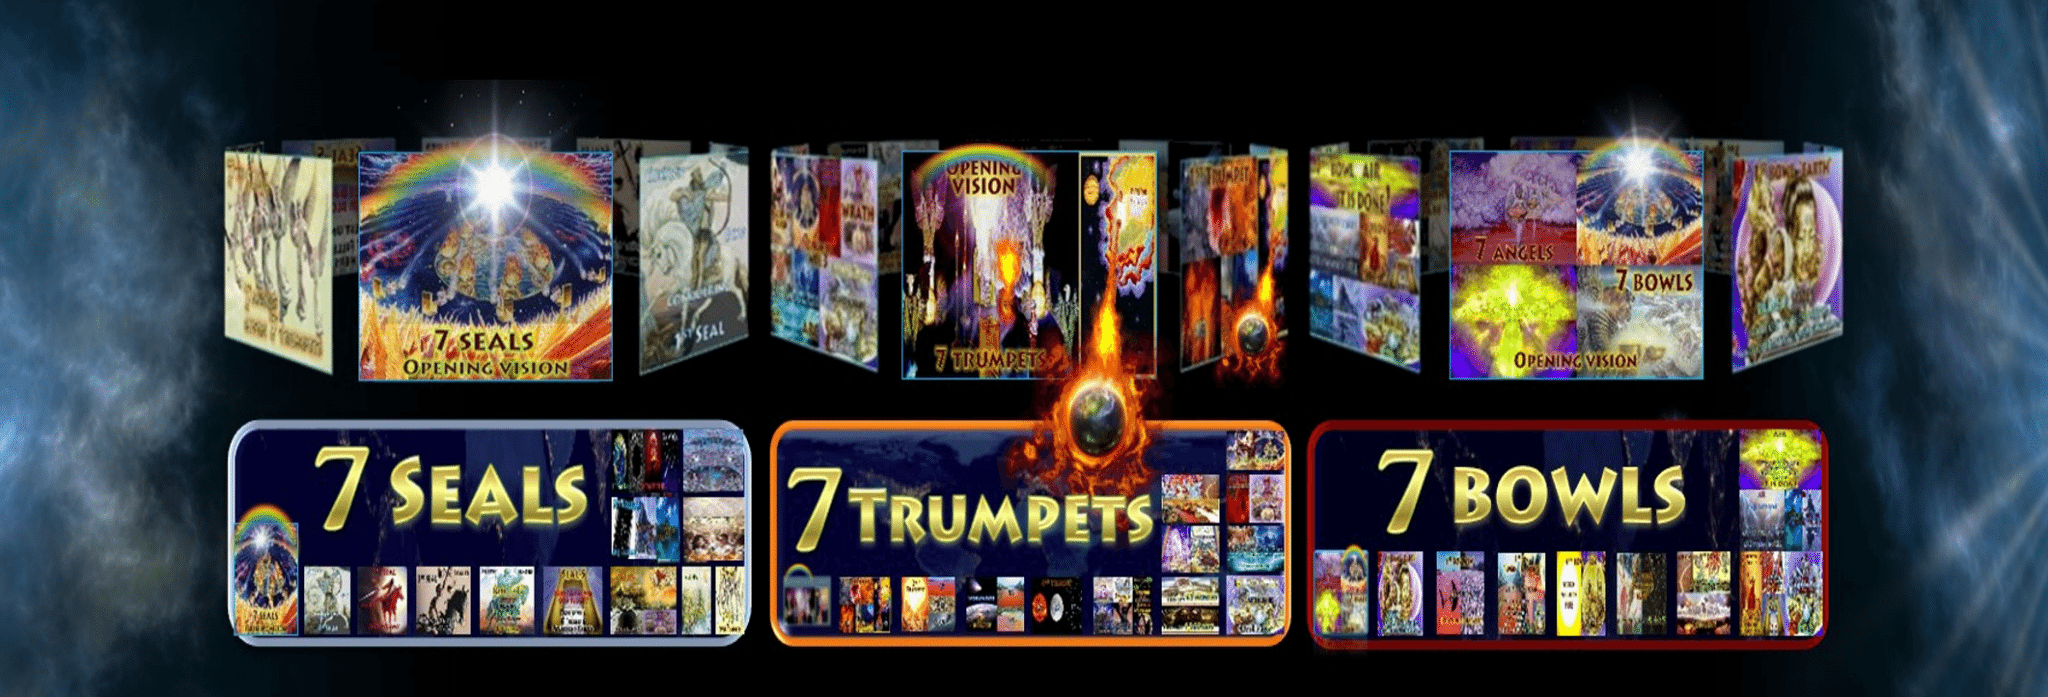 7 Seals,Book of Revelation,Seven Seals,First Seal,Second Seal,Third Seal,Fourth Seal,Fifth Seal,Sixth Seal,Seventh Seal,Chapter 4,Chapter 5,Chapter 6,Chapter 7,7 Trumpets,Seven Trumpets,First Trumpet,Second Trumpet,Third Trumpet,Fourth Trumpet,Fifth Trumpet,Sixth Trumpet,Seventh Trumpet,Book of Revelation,Picture Gallery,Album,Chapter 8,Chapter 9,Chapter 10,Chapter 11,Seven Vials of Wrath,7 Vials,7 Bowls,Seven Bowls,wrath,Picture Gallery,Book of Revelation,First Vial,Second Vial,Third Vial,Fourth Vial,Fifth Vial,Sixth Vial,Seventh Vial,Chapter 15,Chapter 16,Chapter 19,Armageddon,7 Bowls of Wrath,First Bowl,Second Bowl,Third Bowl,Fourth Bowl,Fifth Bowl,Sixth Bowl,Seventh Bowl